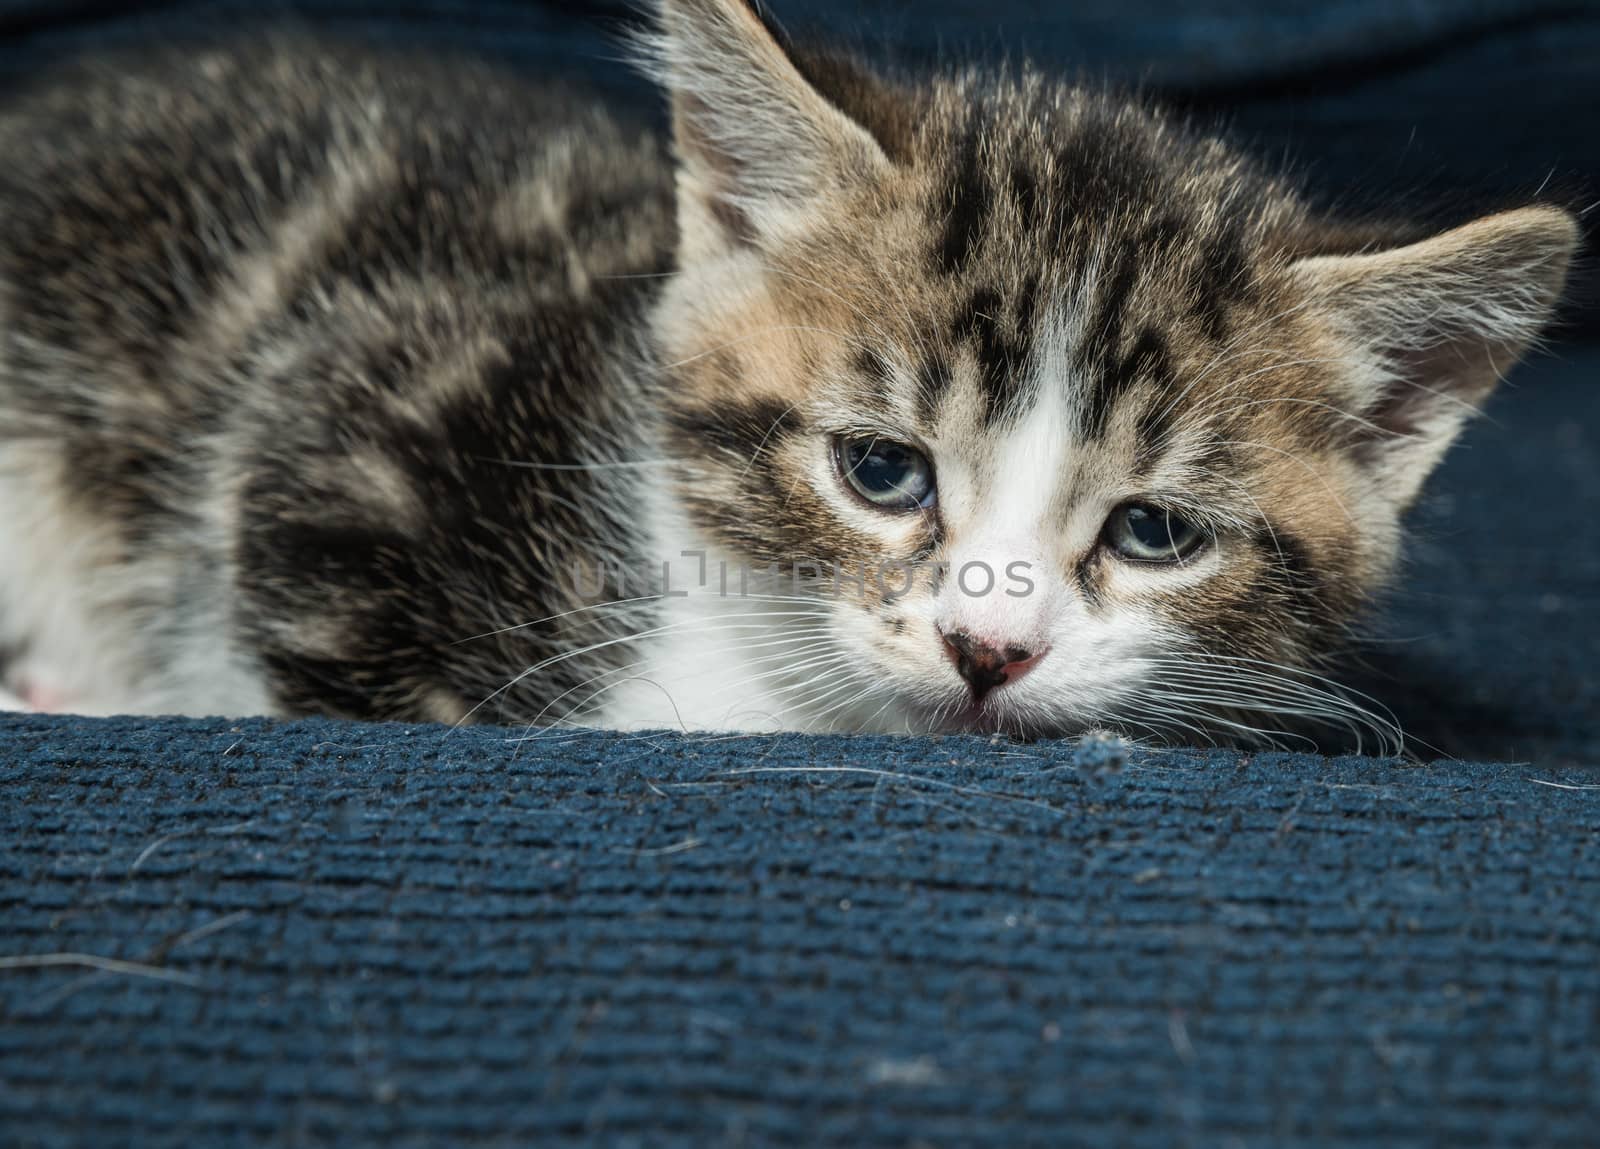 Very cute sleepy baby cat on couch looking comfortable